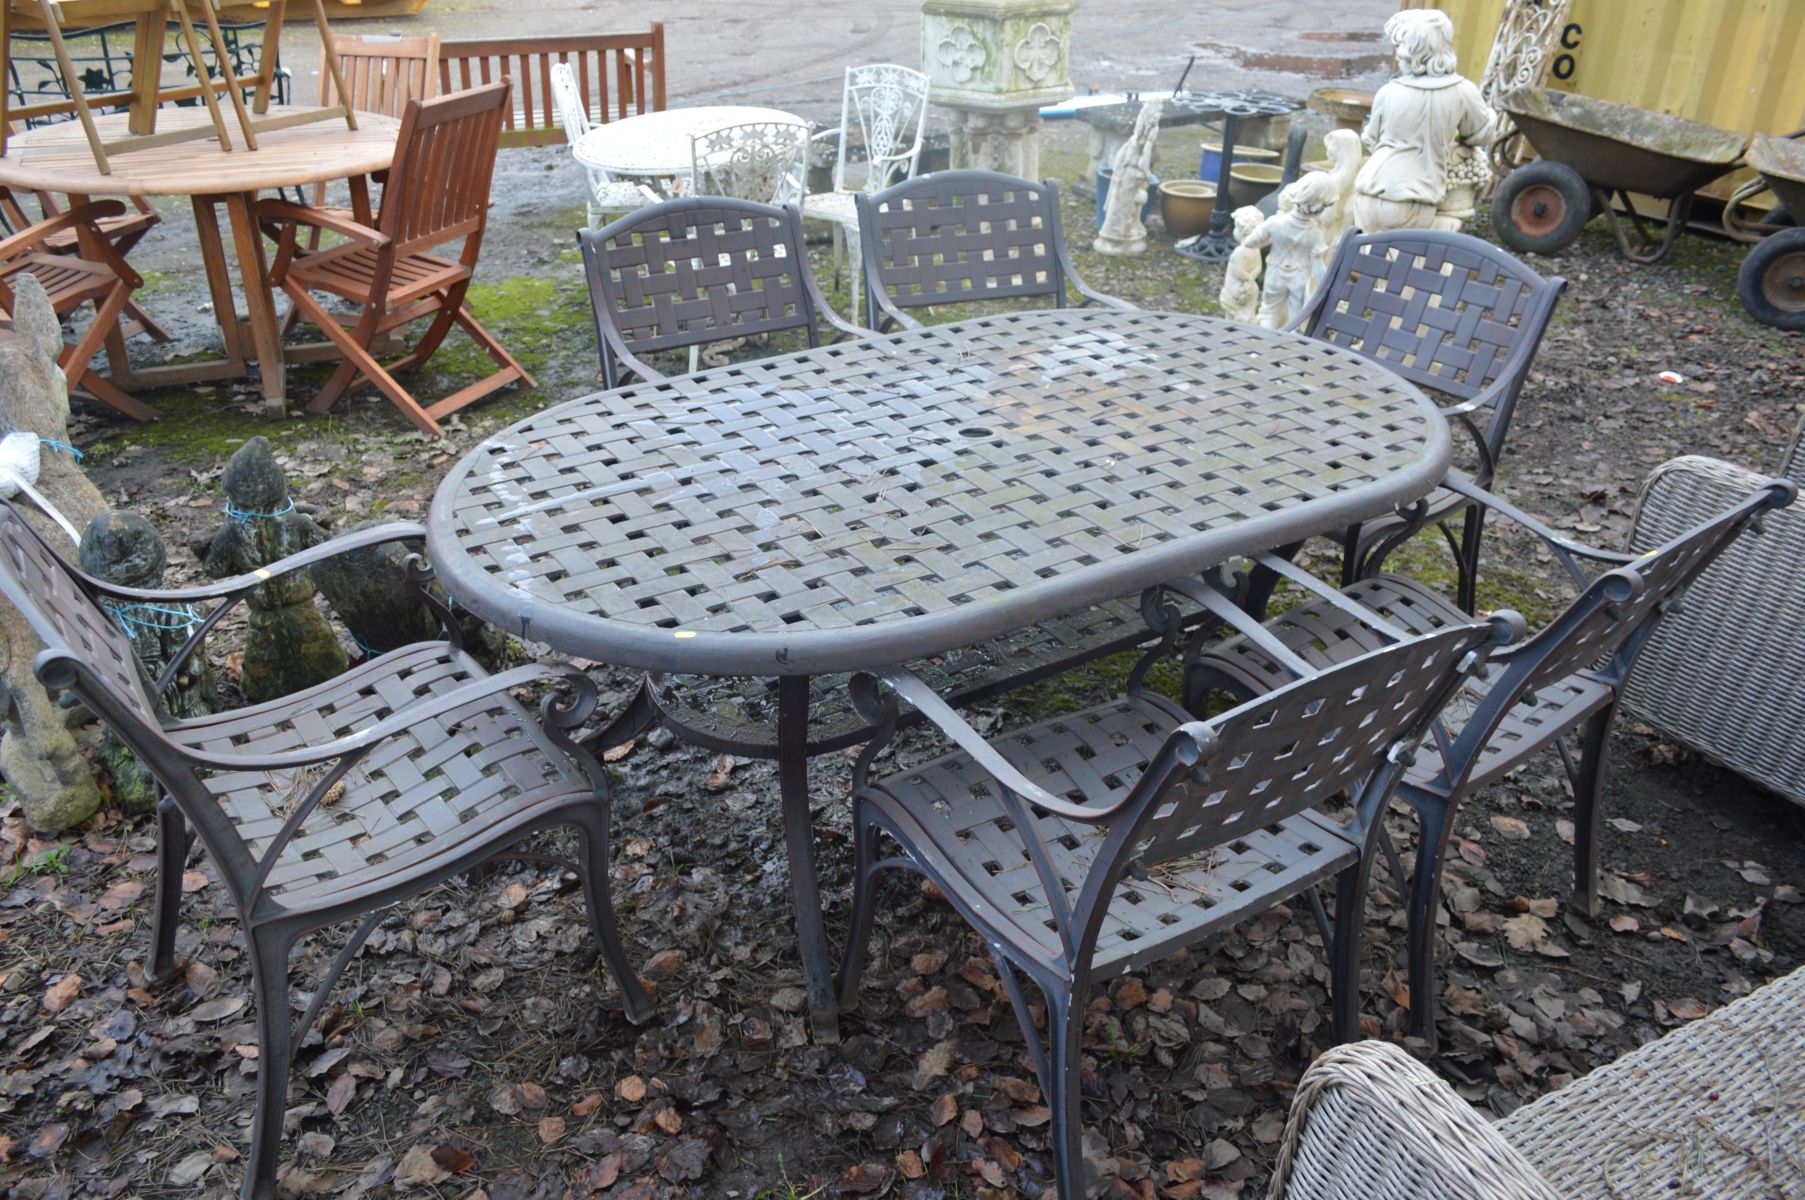 A WROUGHT IRON LATTICE GARDEN TABLE, with rounded corners and undershelf, width 183cm x depth 110cm,